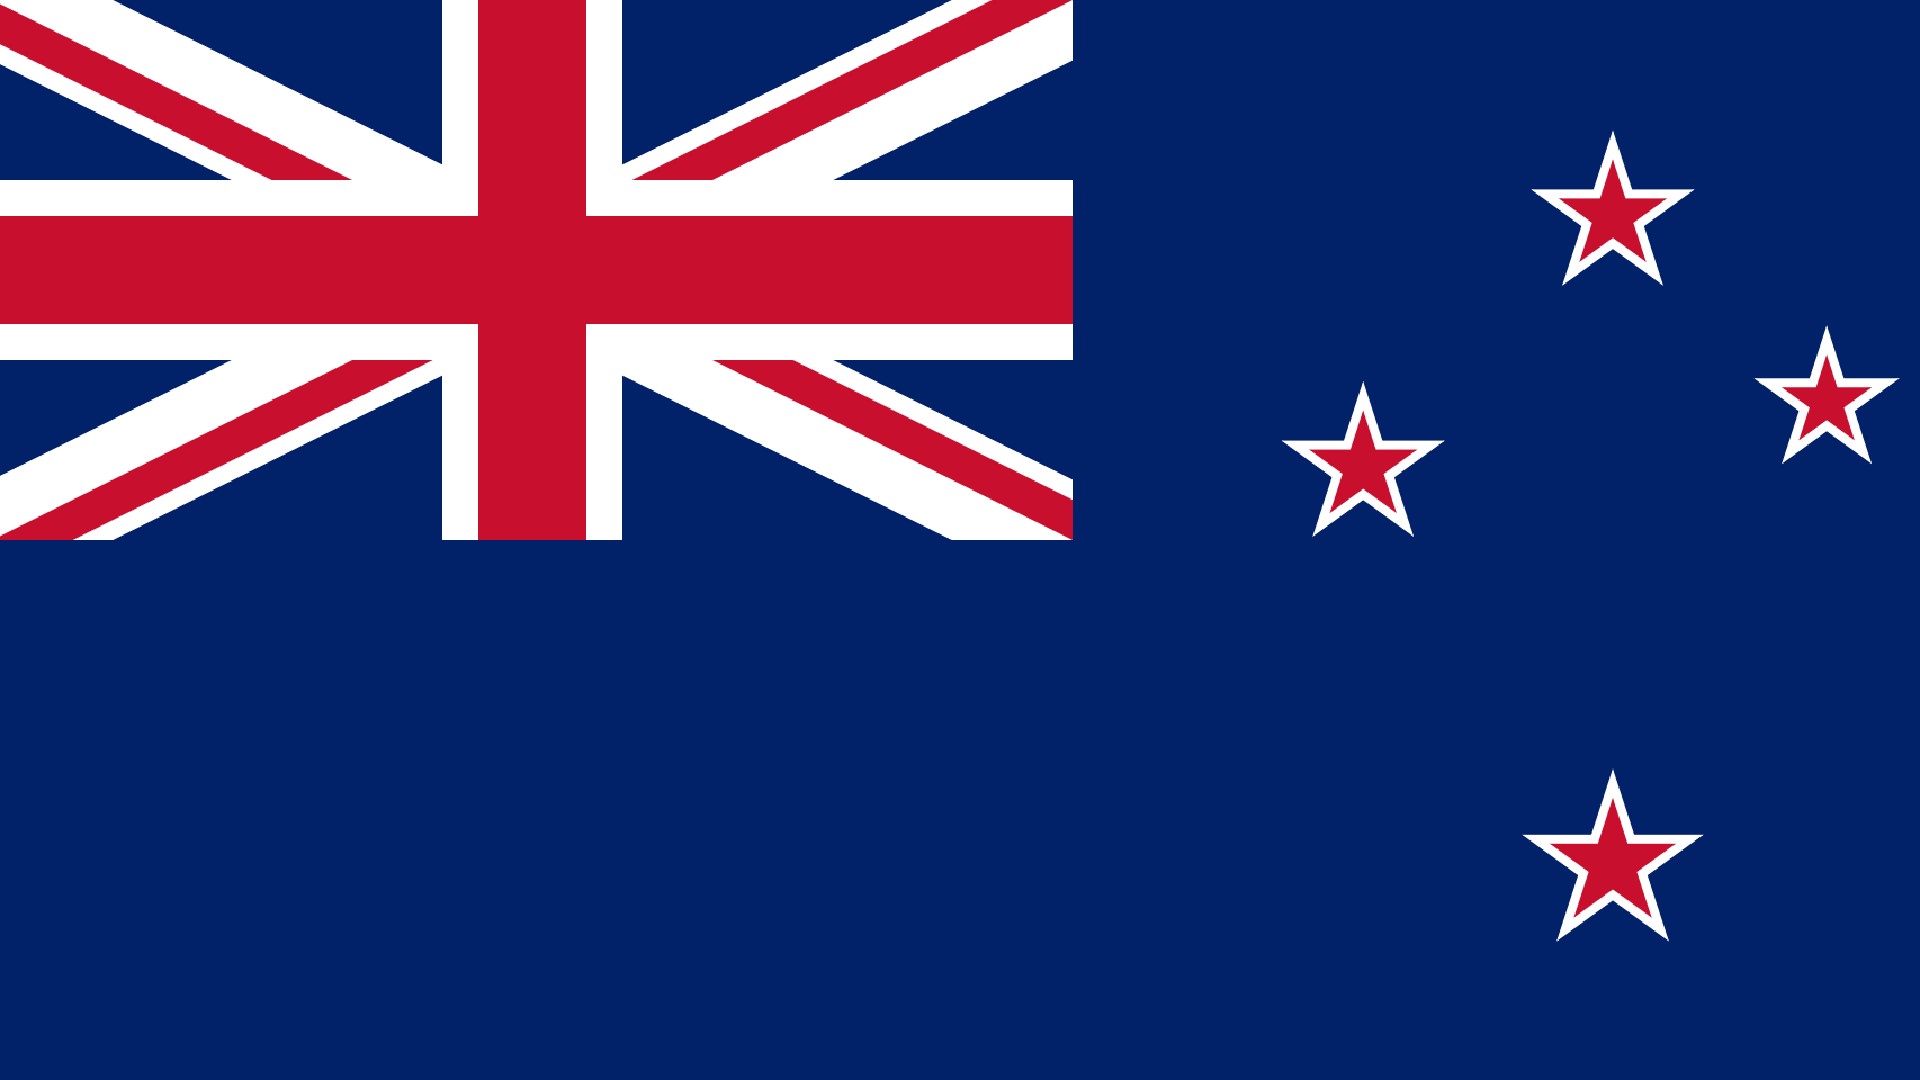 An image of the flag of New Zealand